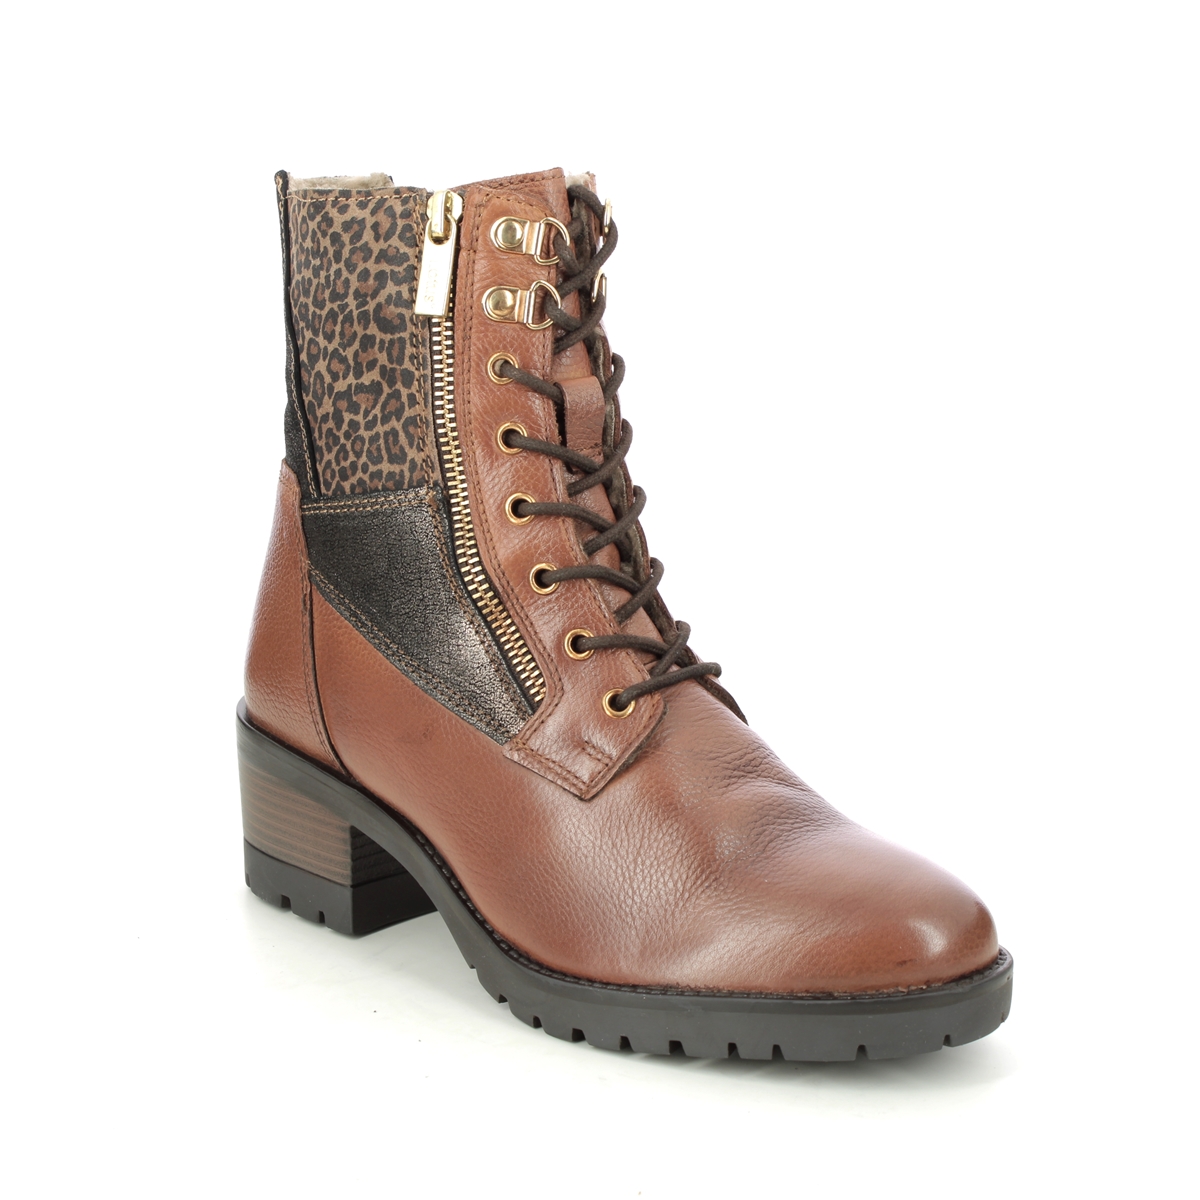 Lotus Oklahoma Crave Tan Leather Womens Lace Up Boots in a Plain Leather in Size 5